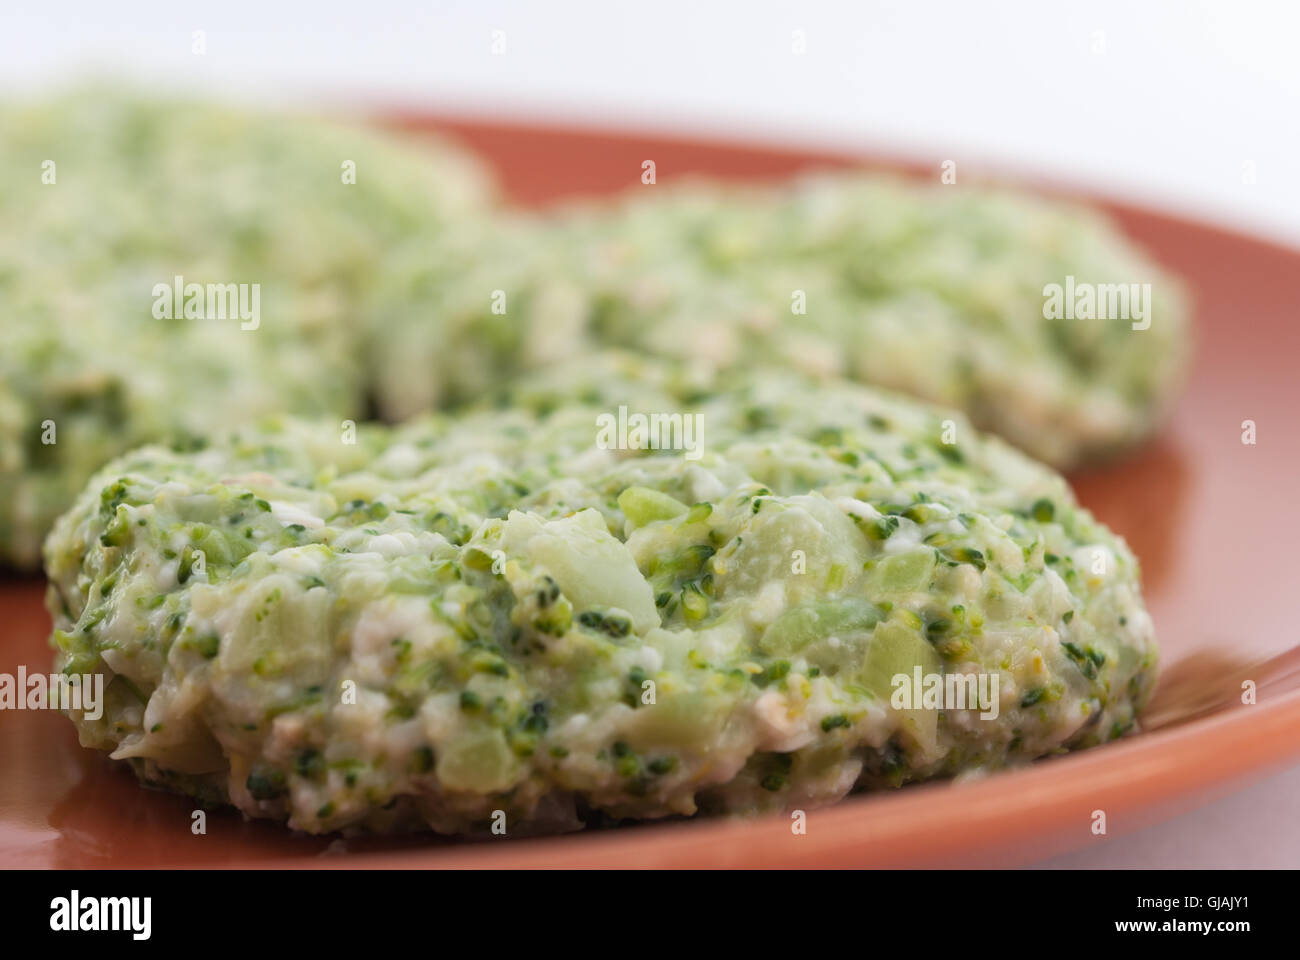 Raw broccoli and cheese pancakes on a brown plate closeup. Stock Photo